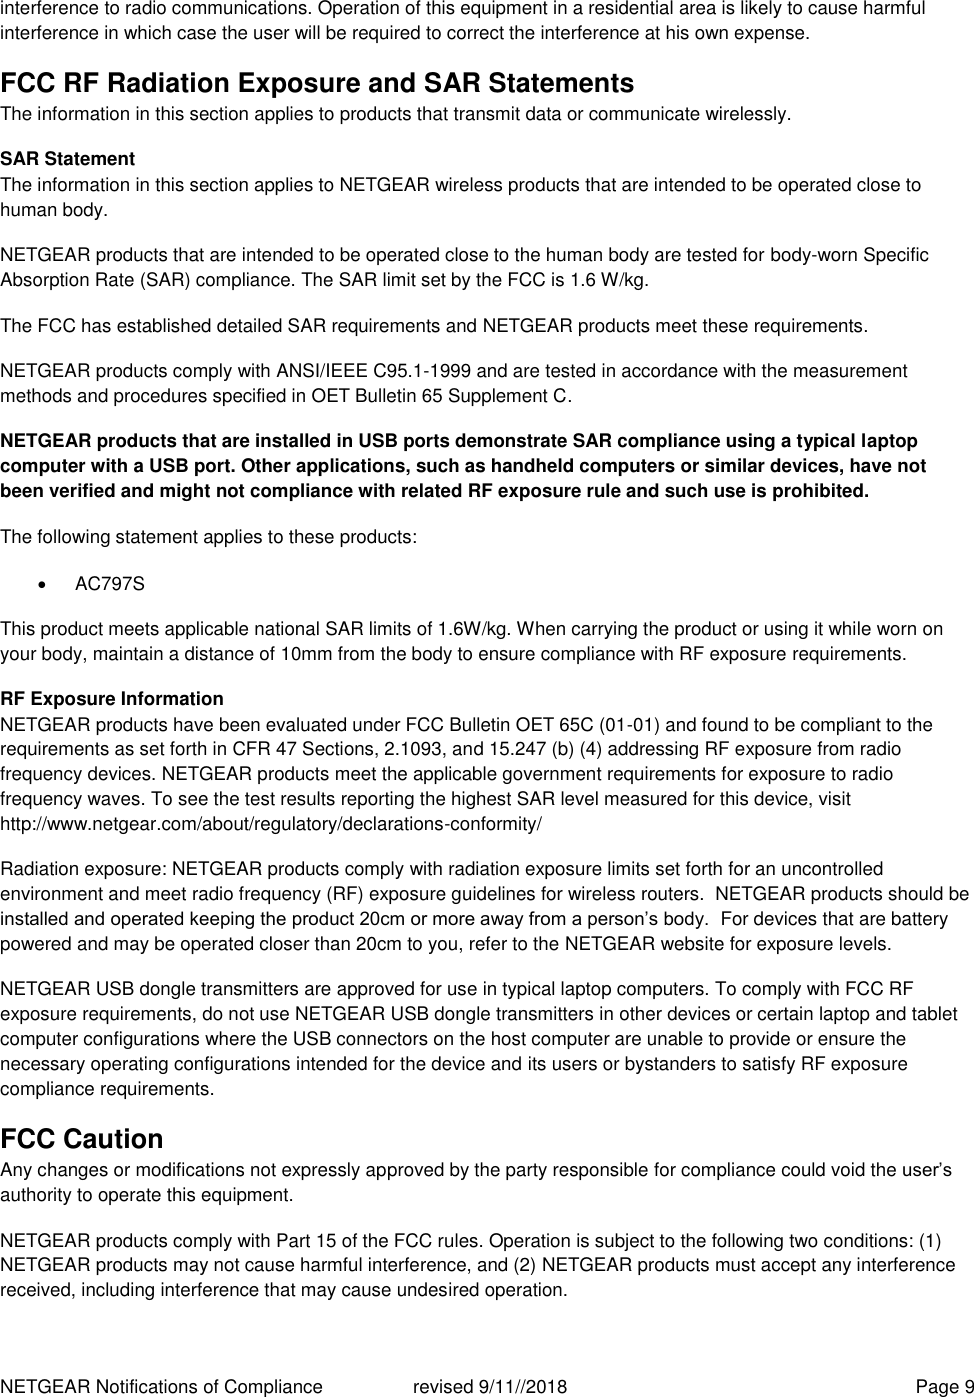 NETGEAR Notifications of Compliance    revised 9/11//2018  Page 9 interference to radio communications. Operation of this equipment in a residential area is likely to cause harmful interference in which case the user will be required to correct the interference at his own expense. FCC RF Radiation Exposure and SAR Statements The information in this section applies to products that transmit data or communicate wirelessly. SAR Statement The information in this section applies to NETGEAR wireless products that are intended to be operated close to human body.  NETGEAR products that are intended to be operated close to the human body are tested for body-worn Specific Absorption Rate (SAR) compliance. The SAR limit set by the FCC is 1.6 W/kg. The FCC has established detailed SAR requirements and NETGEAR products meet these requirements. NETGEAR products comply with ANSI/IEEE C95.1-1999 and are tested in accordance with the measurement methods and procedures specified in OET Bulletin 65 Supplement C. NETGEAR products that are installed in USB ports demonstrate SAR compliance using a typical laptop computer with a USB port. Other applications, such as handheld computers or similar devices, have not been verified and might not compliance with related RF exposure rule and such use is prohibited. The following statement applies to these products:   AC797S This product meets applicable national SAR limits of 1.6W/kg. When carrying the product or using it while worn on your body, maintain a distance of 10mm from the body to ensure compliance with RF exposure requirements. RF Exposure Information NETGEAR products have been evaluated under FCC Bulletin OET 65C (01-01) and found to be compliant to the requirements as set forth in CFR 47 Sections, 2.1093, and 15.247 (b) (4) addressing RF exposure from radio frequency devices. NETGEAR products meet the applicable government requirements for exposure to radio frequency waves. To see the test results reporting the highest SAR level measured for this device, visit http://www.netgear.com/about/regulatory/declarations-conformity/ Radiation exposure: NETGEAR products comply with radiation exposure limits set forth for an uncontrolled environment and meet radio frequency (RF) exposure guidelines for wireless routers.  NETGEAR products should be installed and operated keeping the product 20cm or more away from a person’s body.  For devices that are battery powered and may be operated closer than 20cm to you, refer to the NETGEAR website for exposure levels. NETGEAR USB dongle transmitters are approved for use in typical laptop computers. To comply with FCC RF exposure requirements, do not use NETGEAR USB dongle transmitters in other devices or certain laptop and tablet computer configurations where the USB connectors on the host computer are unable to provide or ensure the necessary operating configurations intended for the device and its users or bystanders to satisfy RF exposure compliance requirements.    FCC Caution Any changes or modifications not expressly approved by the party responsible for compliance could void the user’s authority to operate this equipment. NETGEAR products comply with Part 15 of the FCC rules. Operation is subject to the following two conditions: (1) NETGEAR products may not cause harmful interference, and (2) NETGEAR products must accept any interference received, including interference that may cause undesired operation. 